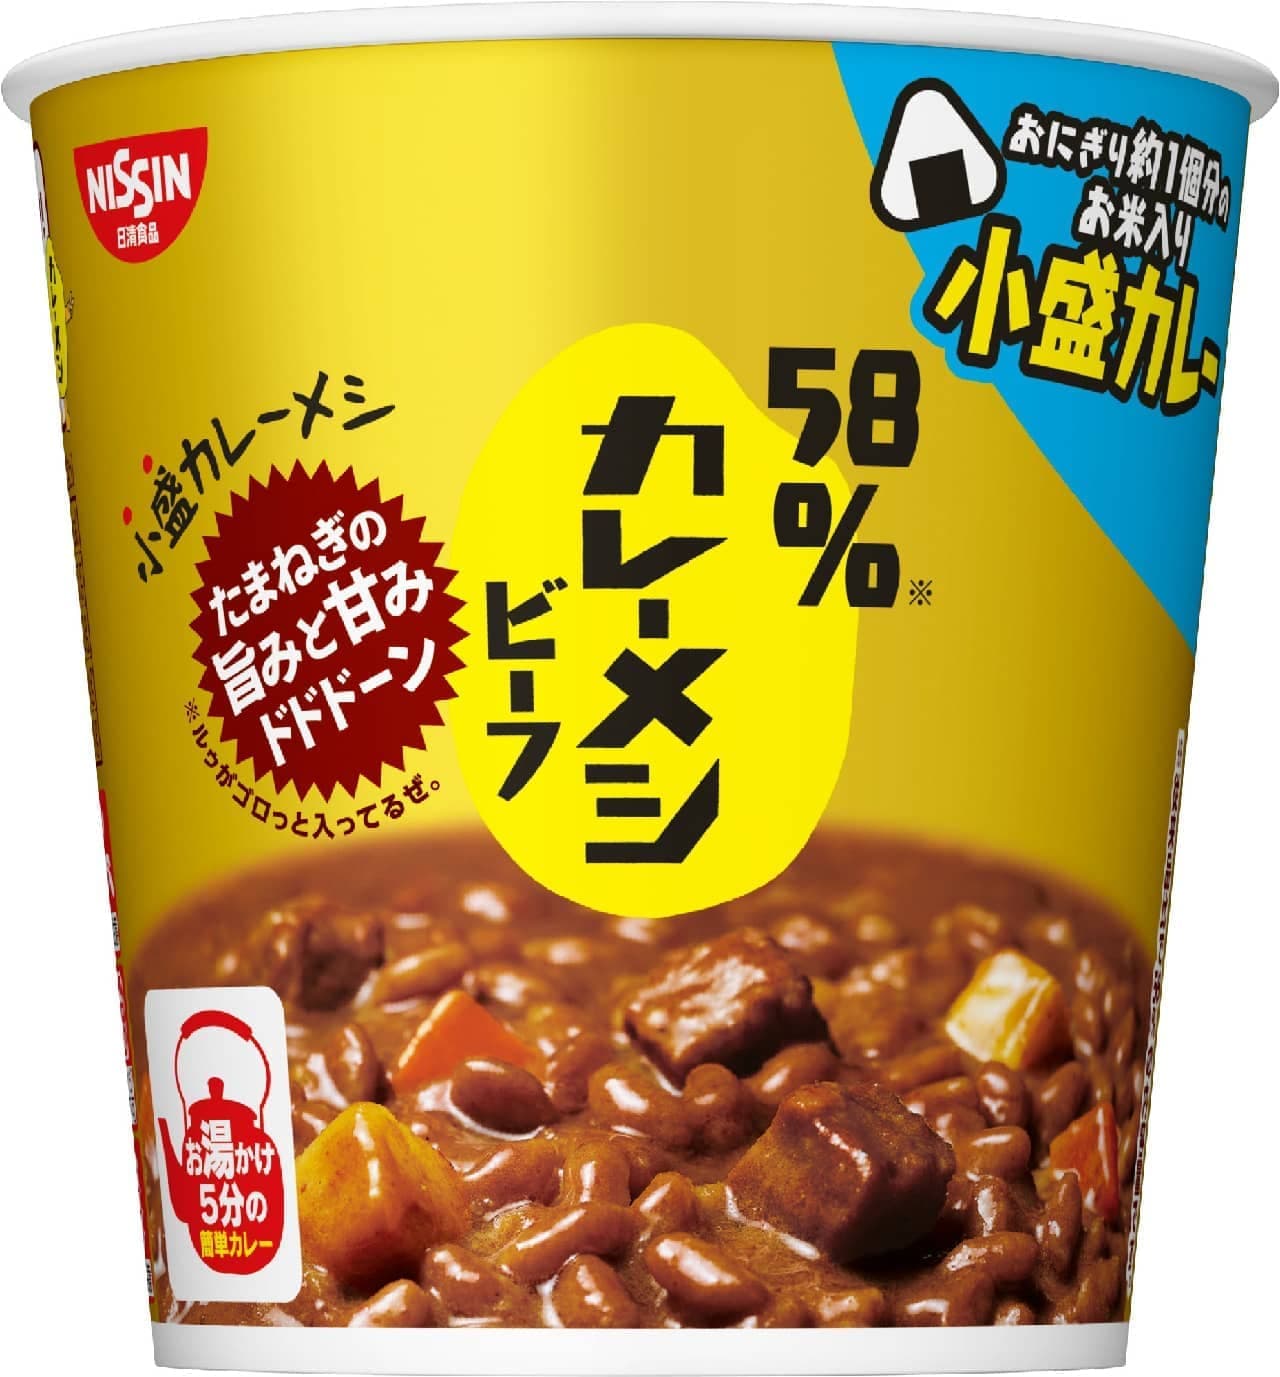 Nissin Foods "Nissin 58% Curry Meshi Beef"